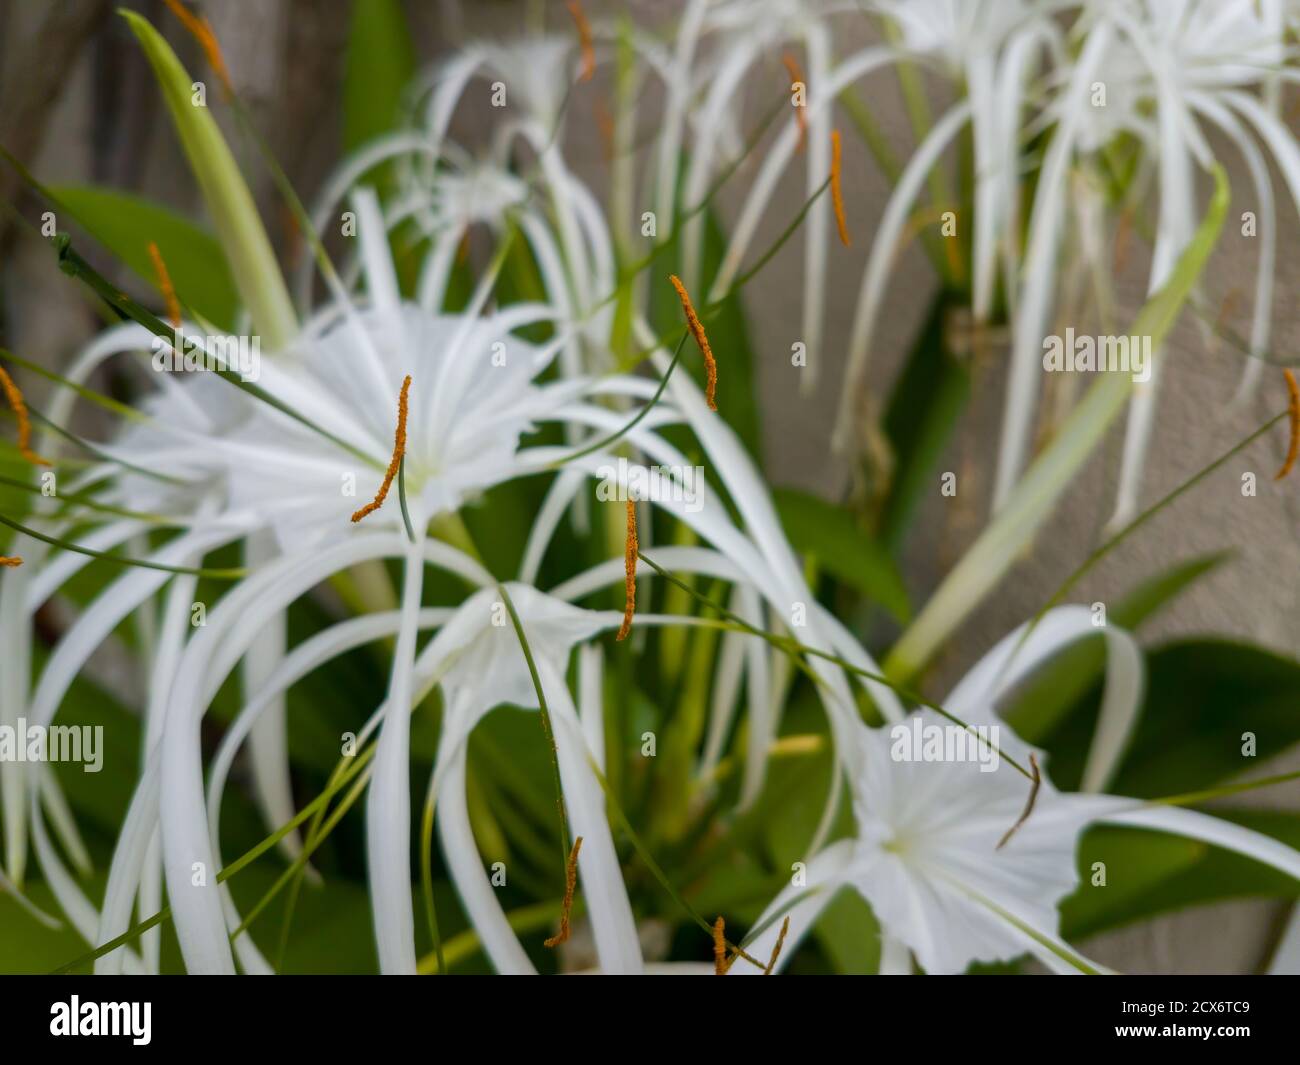 Closeup of stamens of spider lilies flowers Stock Photo